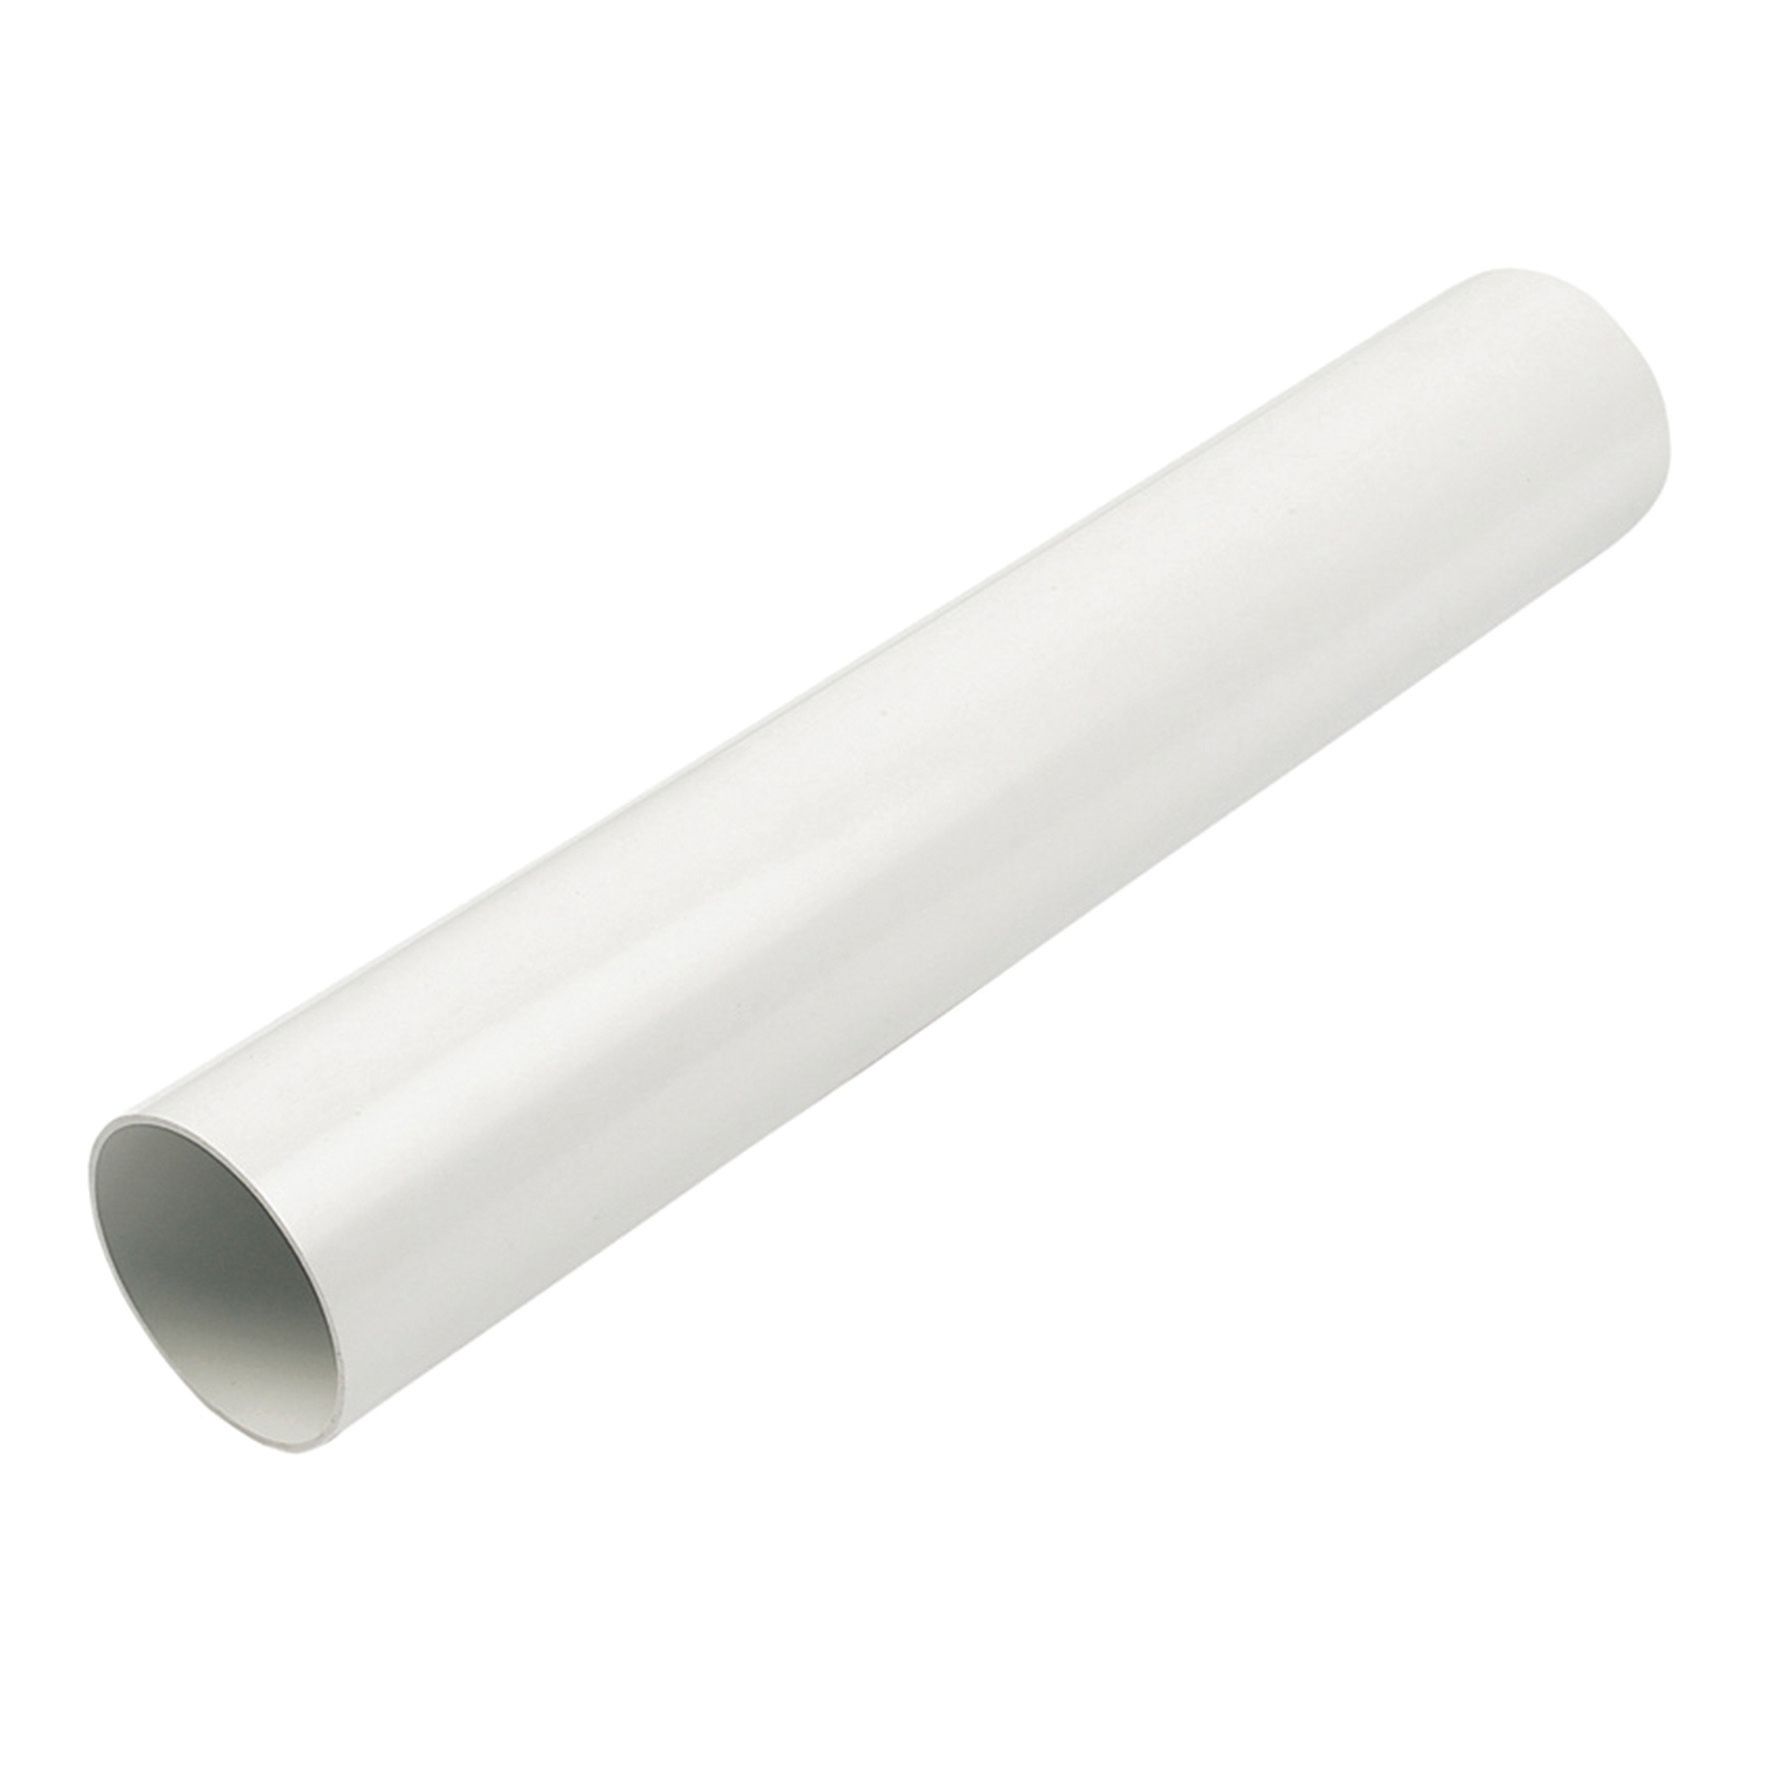 Image of FloPlast Overflow System Pipe - White 21.5mm x 3m